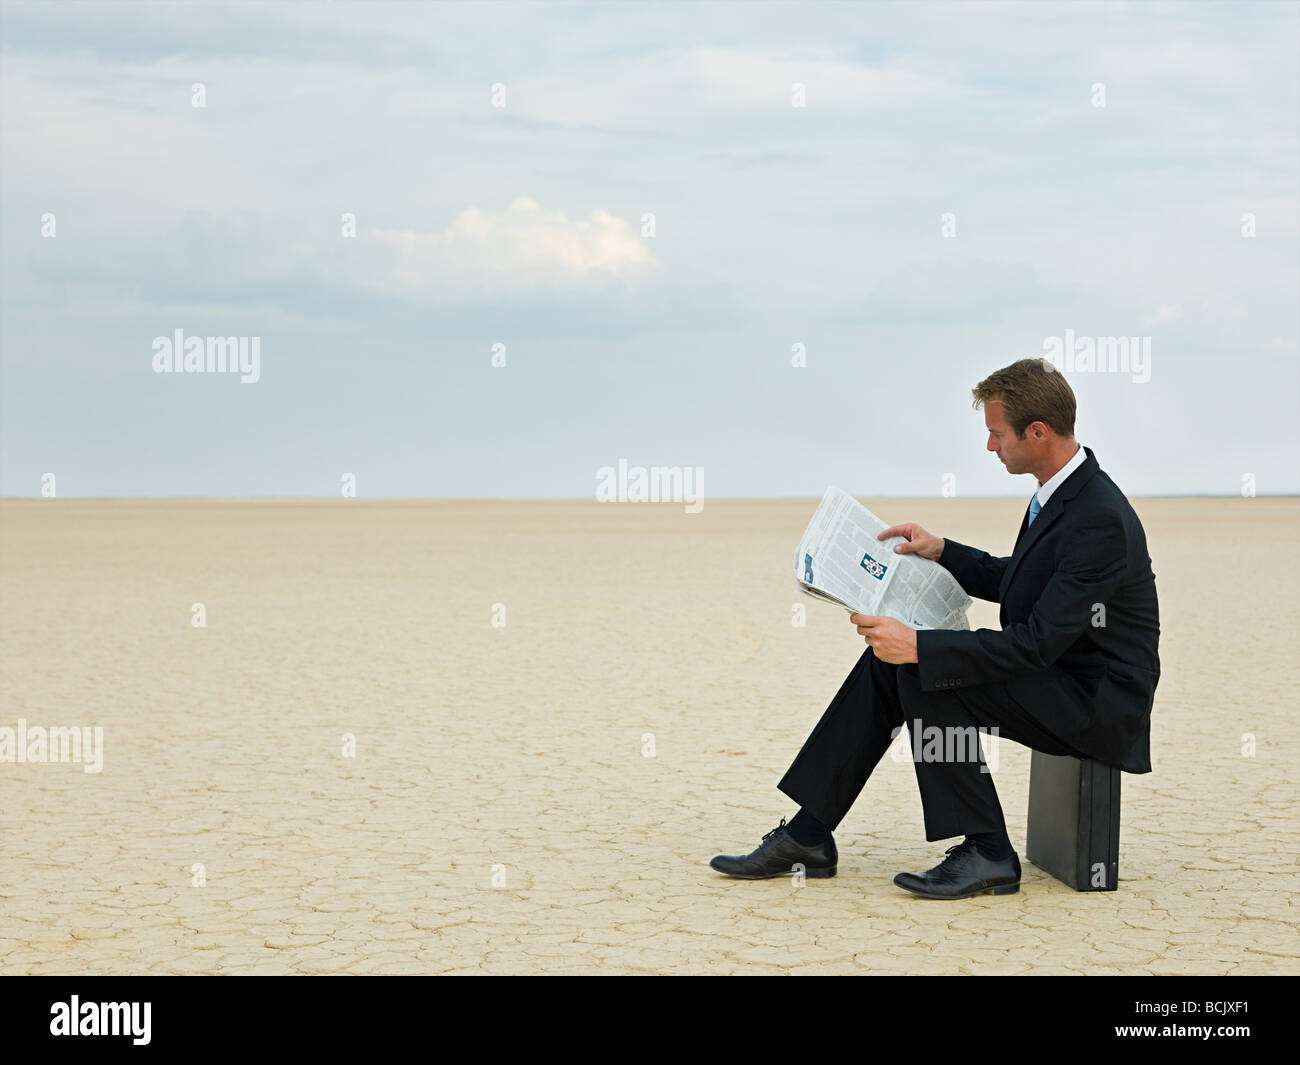 Businessman reading a newspaper in the desert Stock Photo